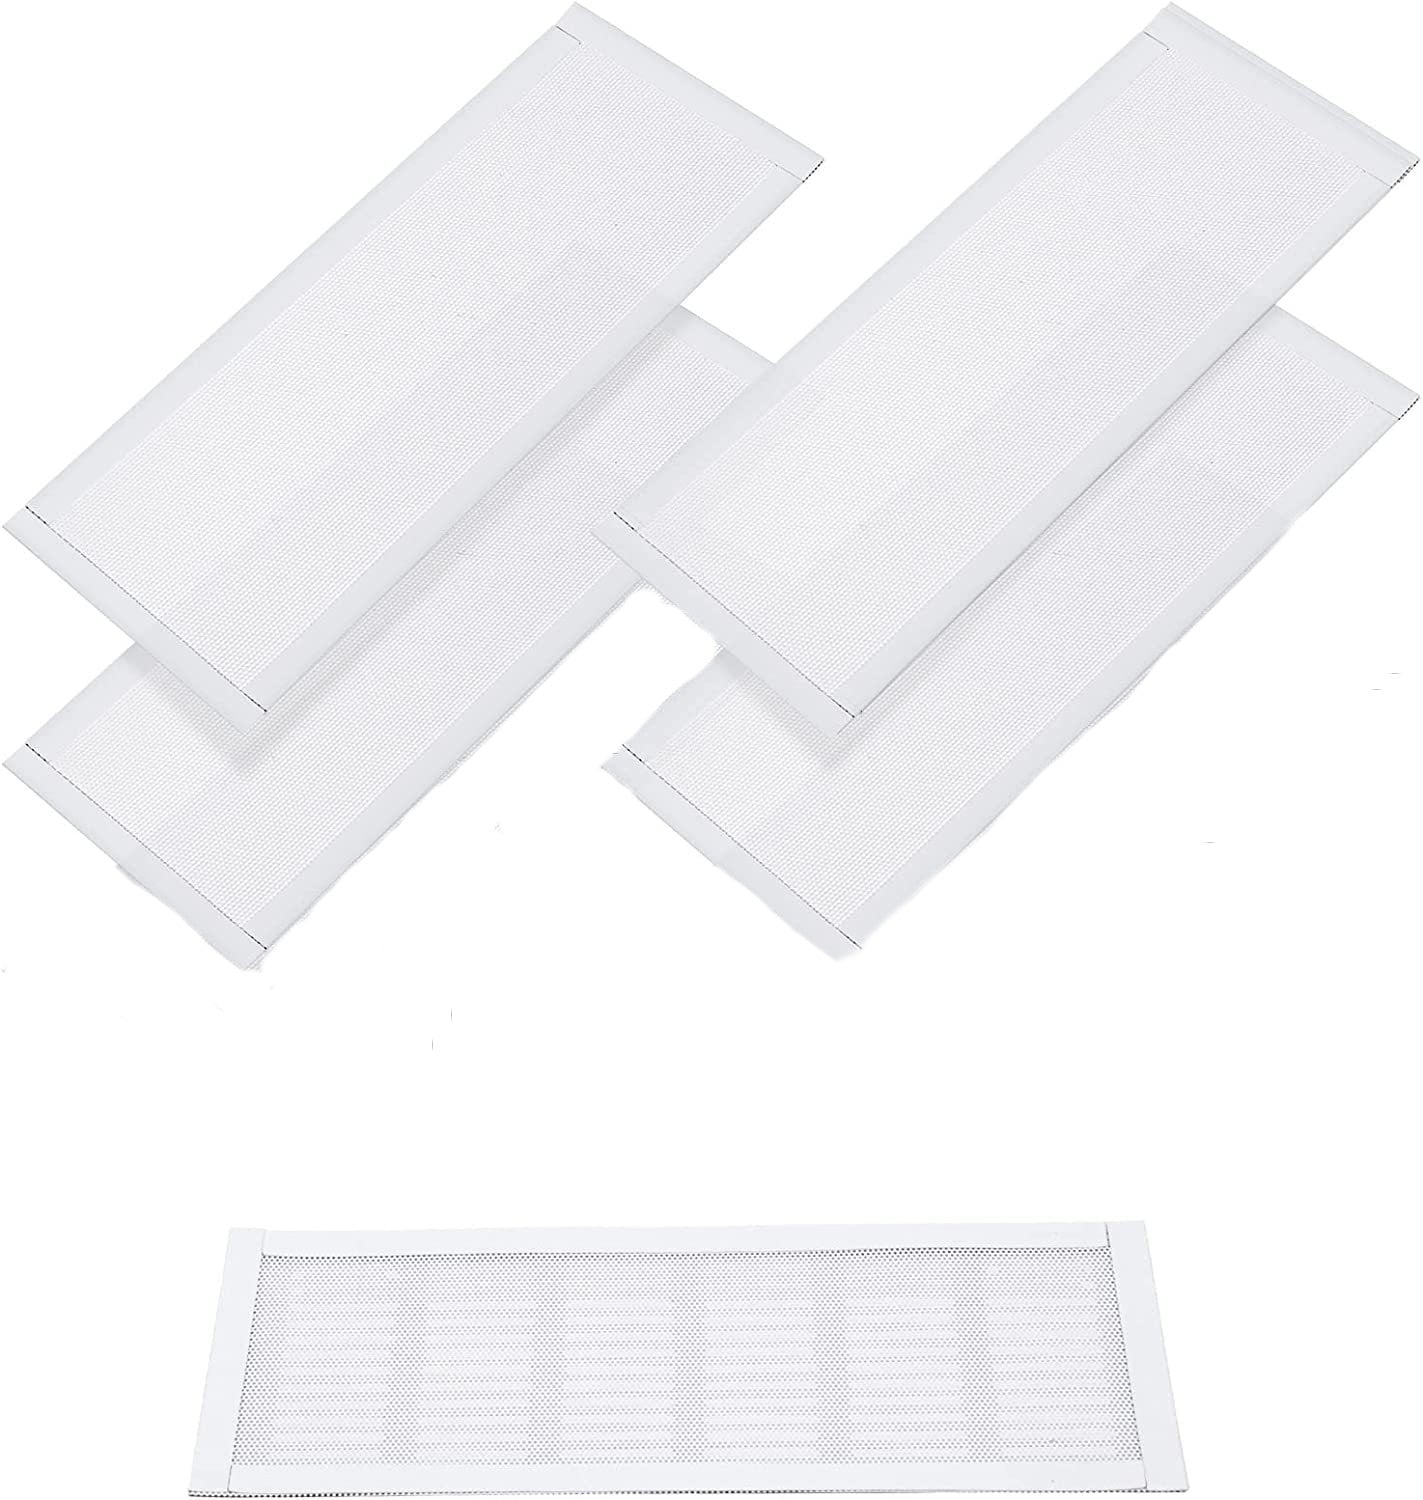 GLFSIL 1/4pcs Magnetic Vent Cover Extra Thick Wall Floor Ceiling Vent Covers  8x15.5in 